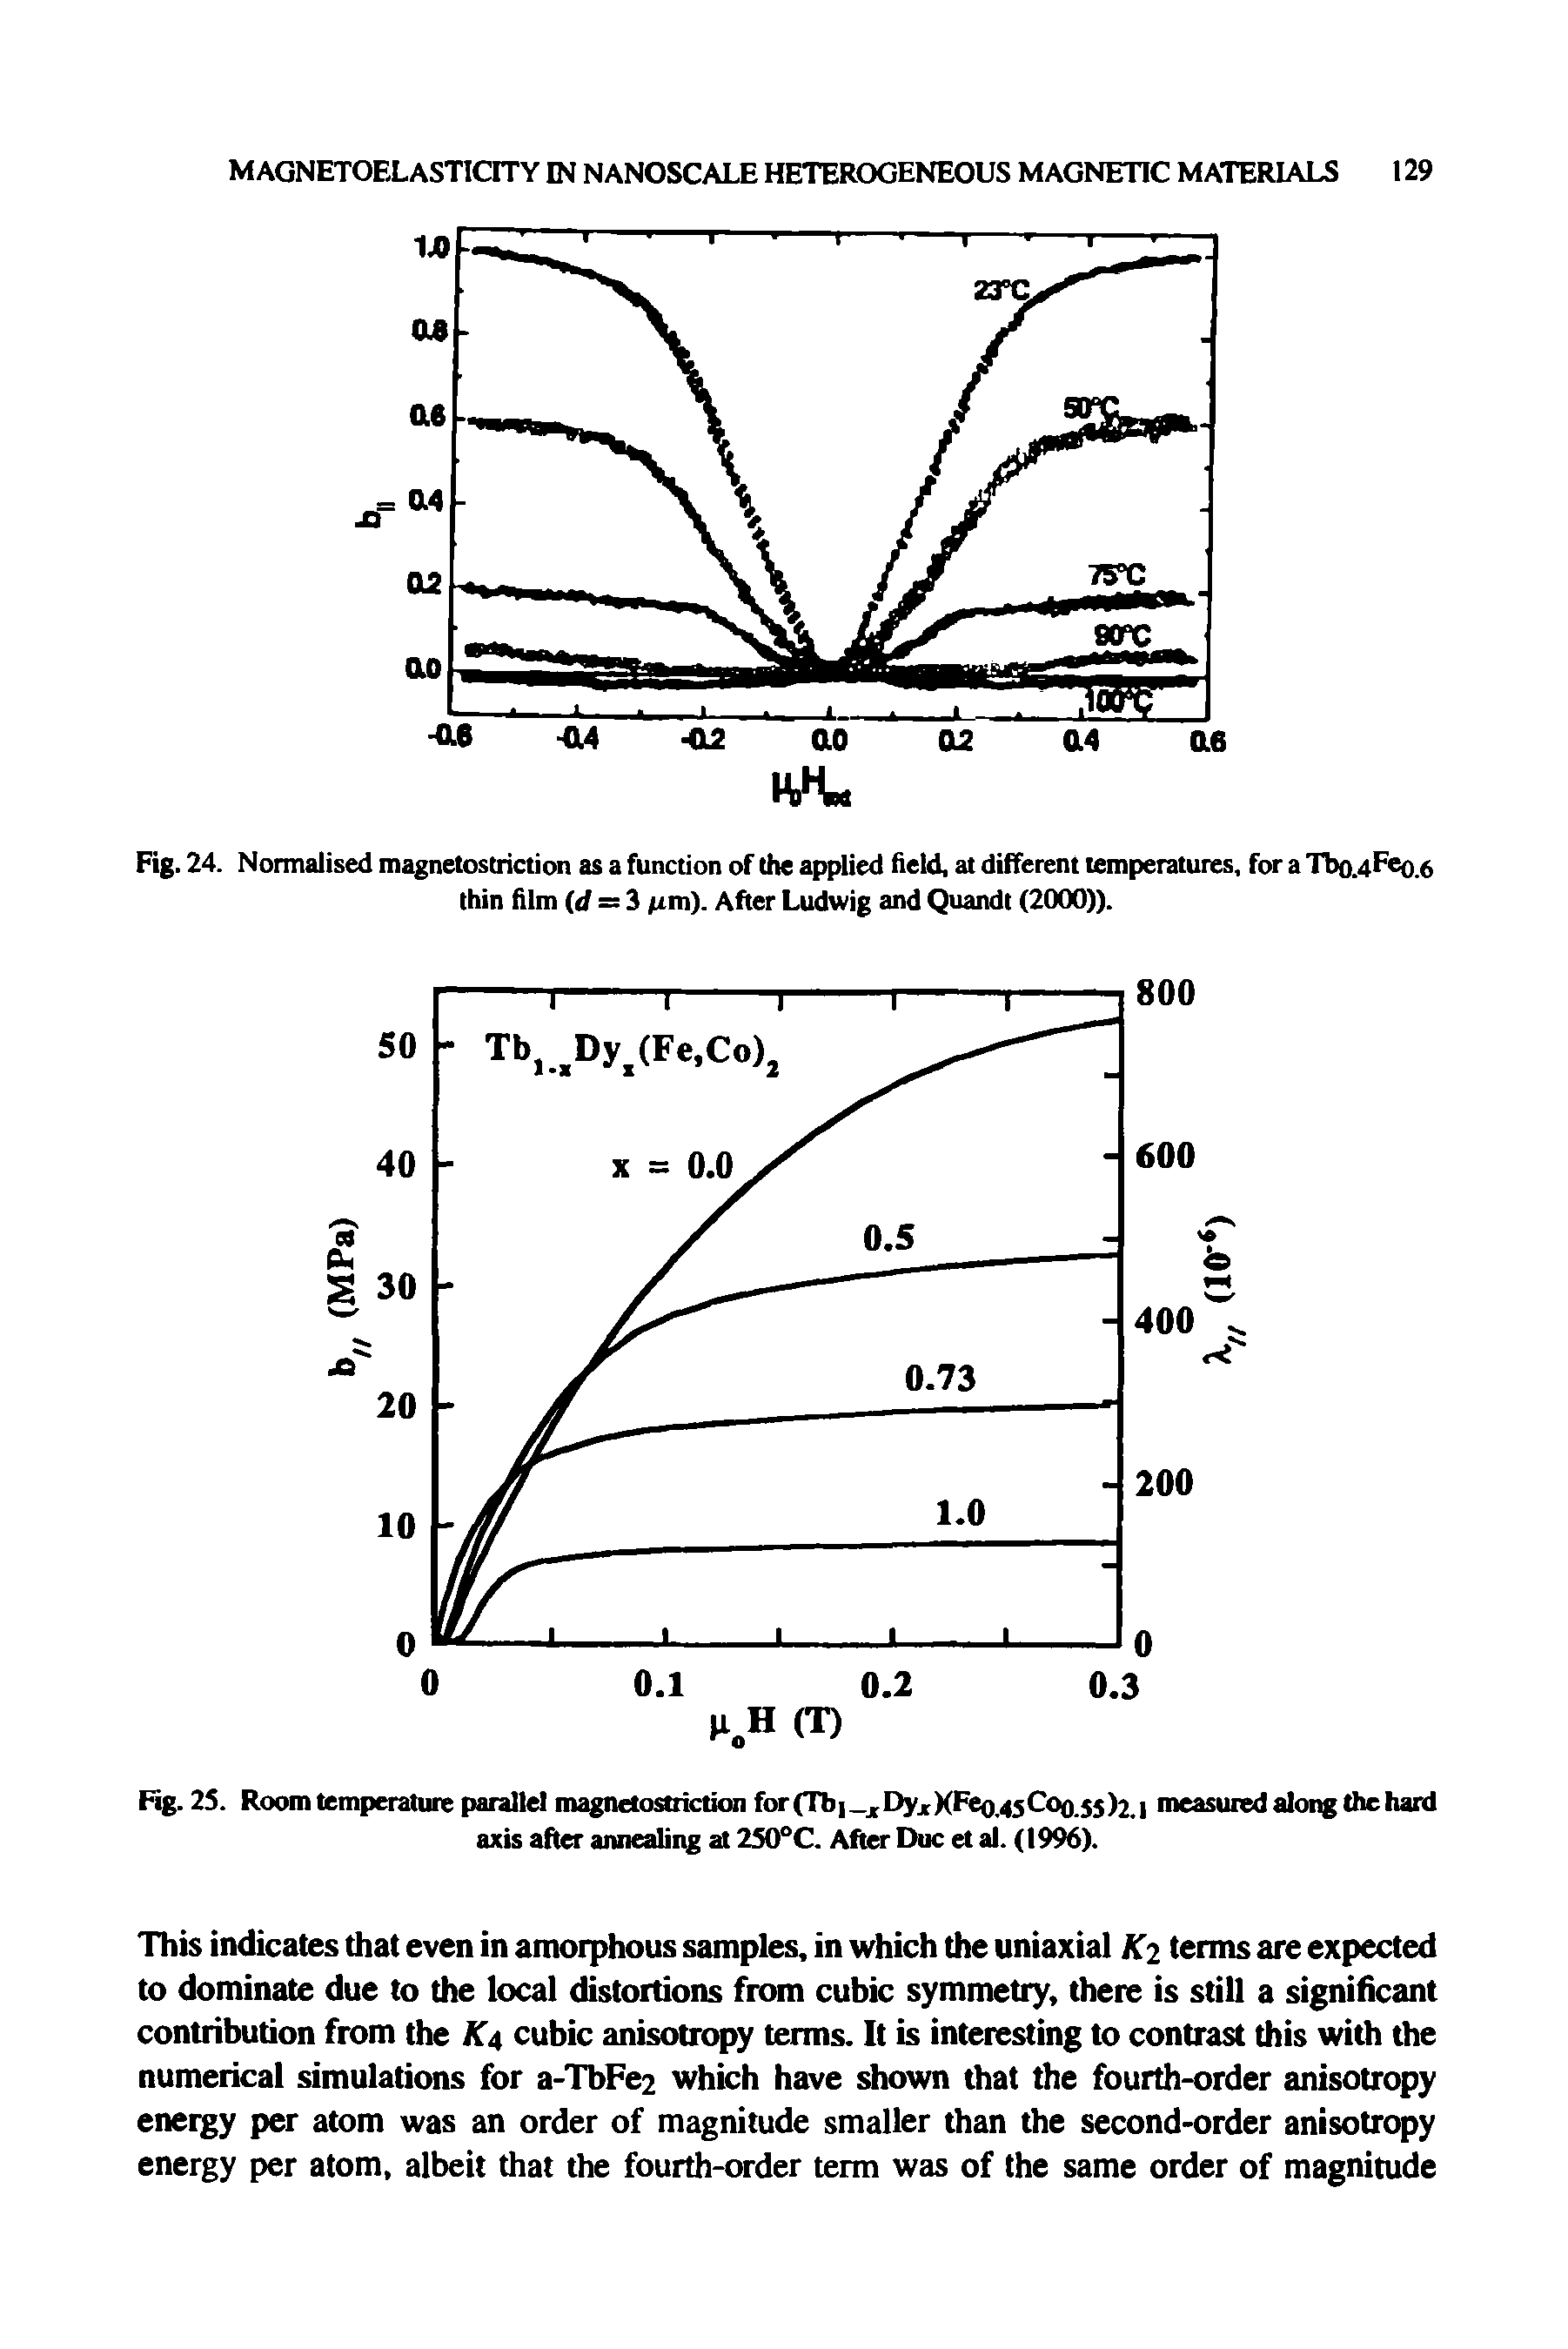 Fig. 25. Room temperature parallel magnetostriction for (Tb x Dyx XFeo.45C00.55 )2.1 measured along the hard axis after annealing at 250°C. After Due et al. (1996).